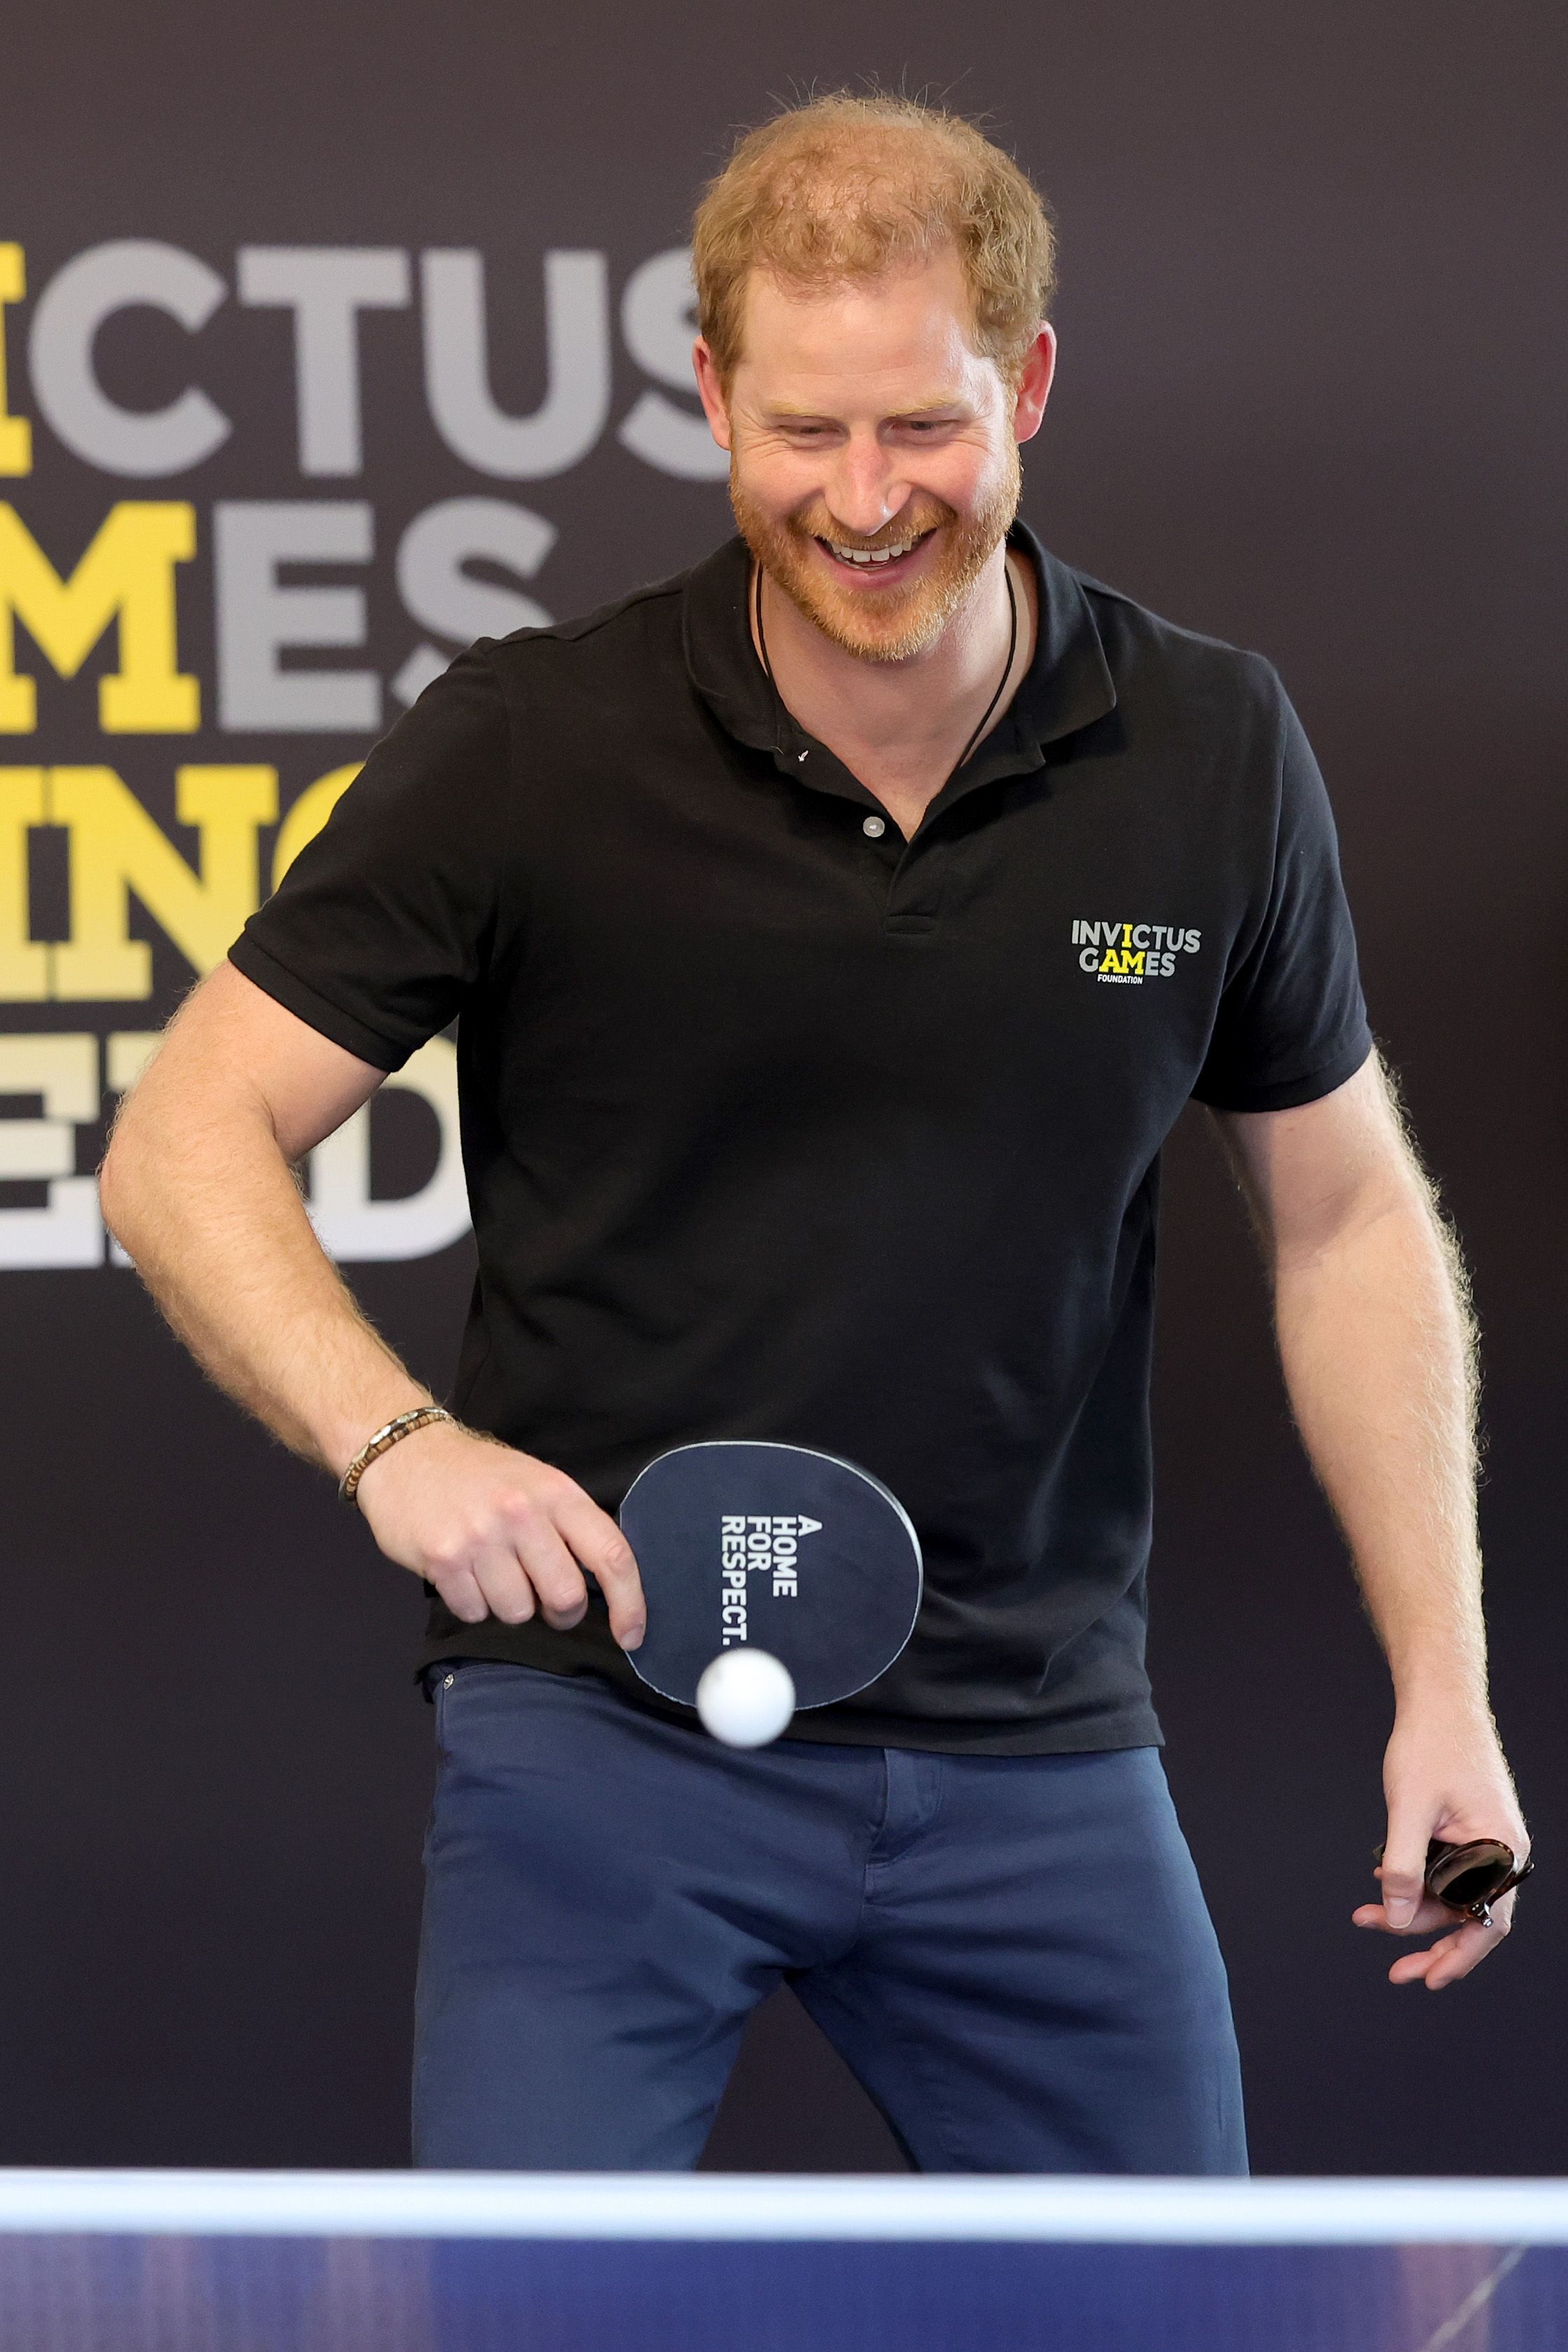 Prince Harry, Duke of Sussex plays table tennis at the Invictus Games The Hague 2020 at Zuiderpark on April 19, 2022 in The Hague, Netherlands. | Source: Getty Images